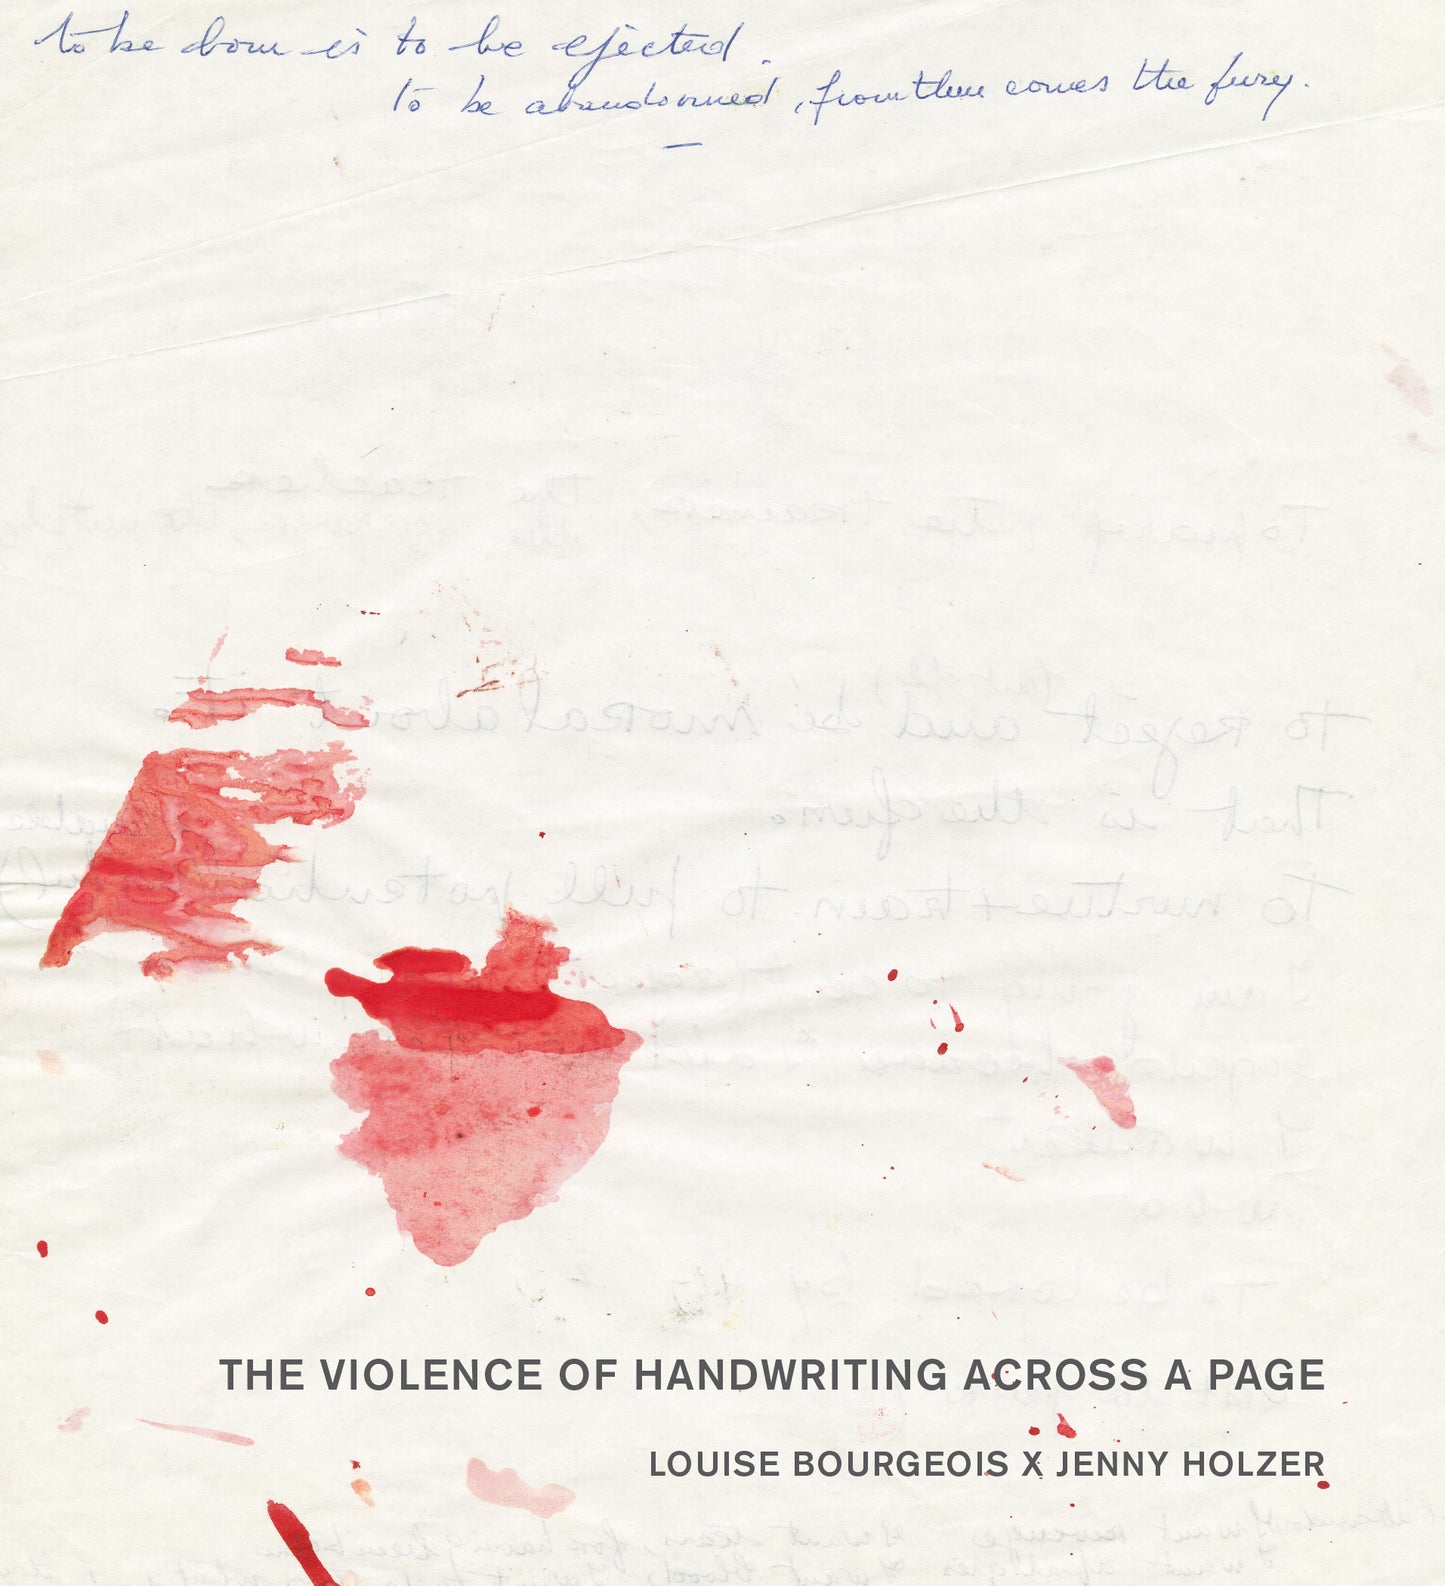 Louise Bourgeois & Jenny Holzer - The Violence of Handwriting Across a Page